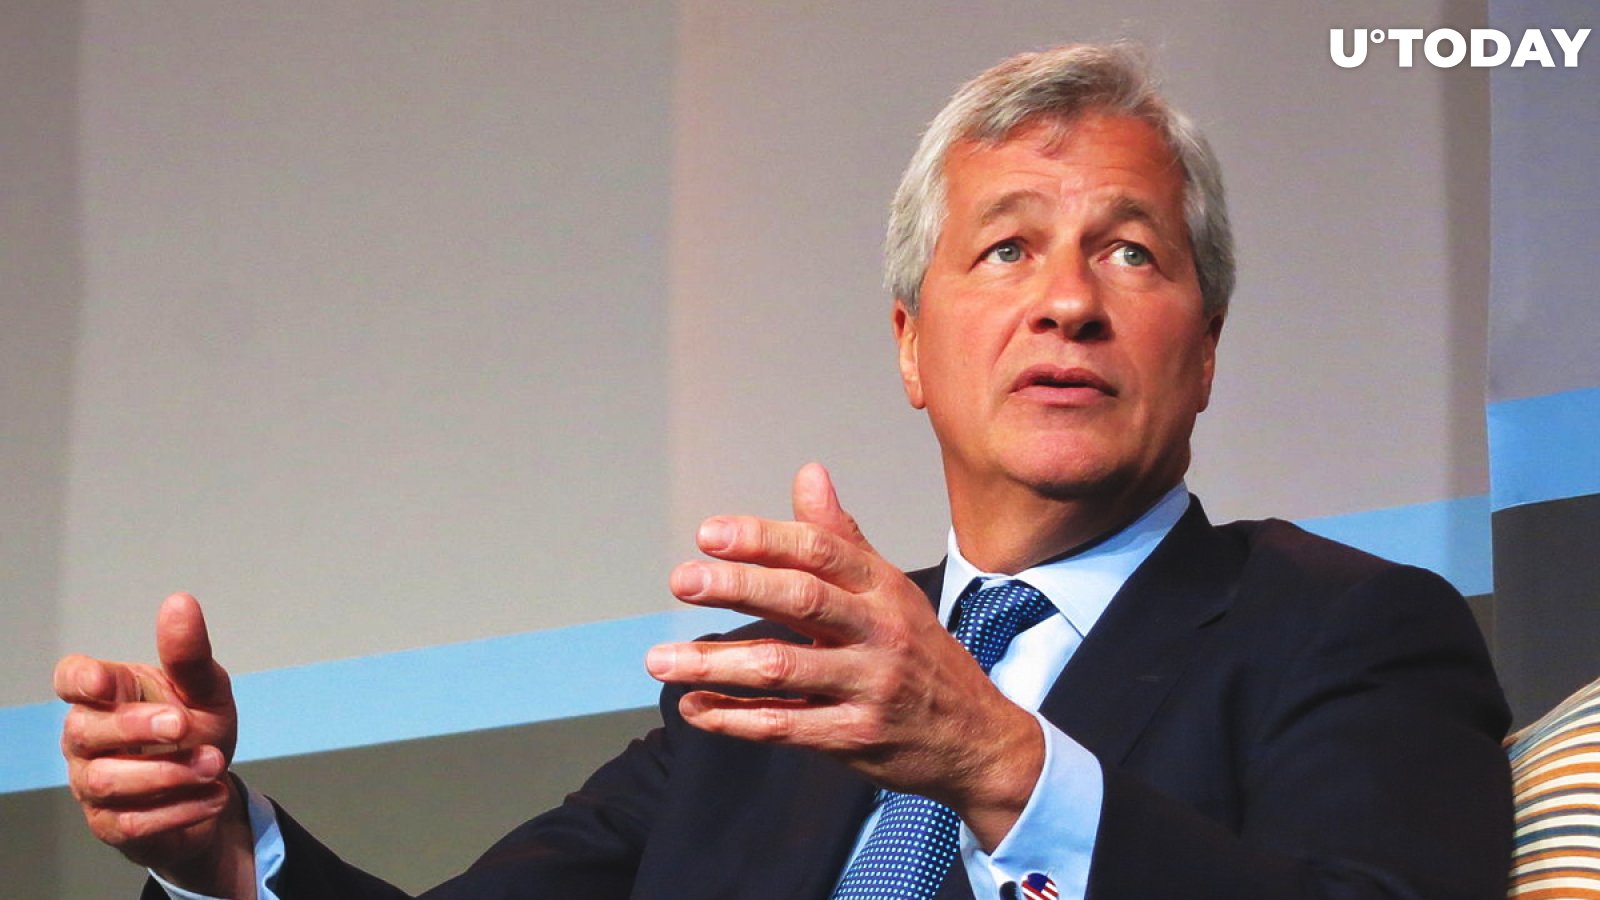 Is Bitcoin About to Plunge? JPMorgan CEO Issues Major Warning 